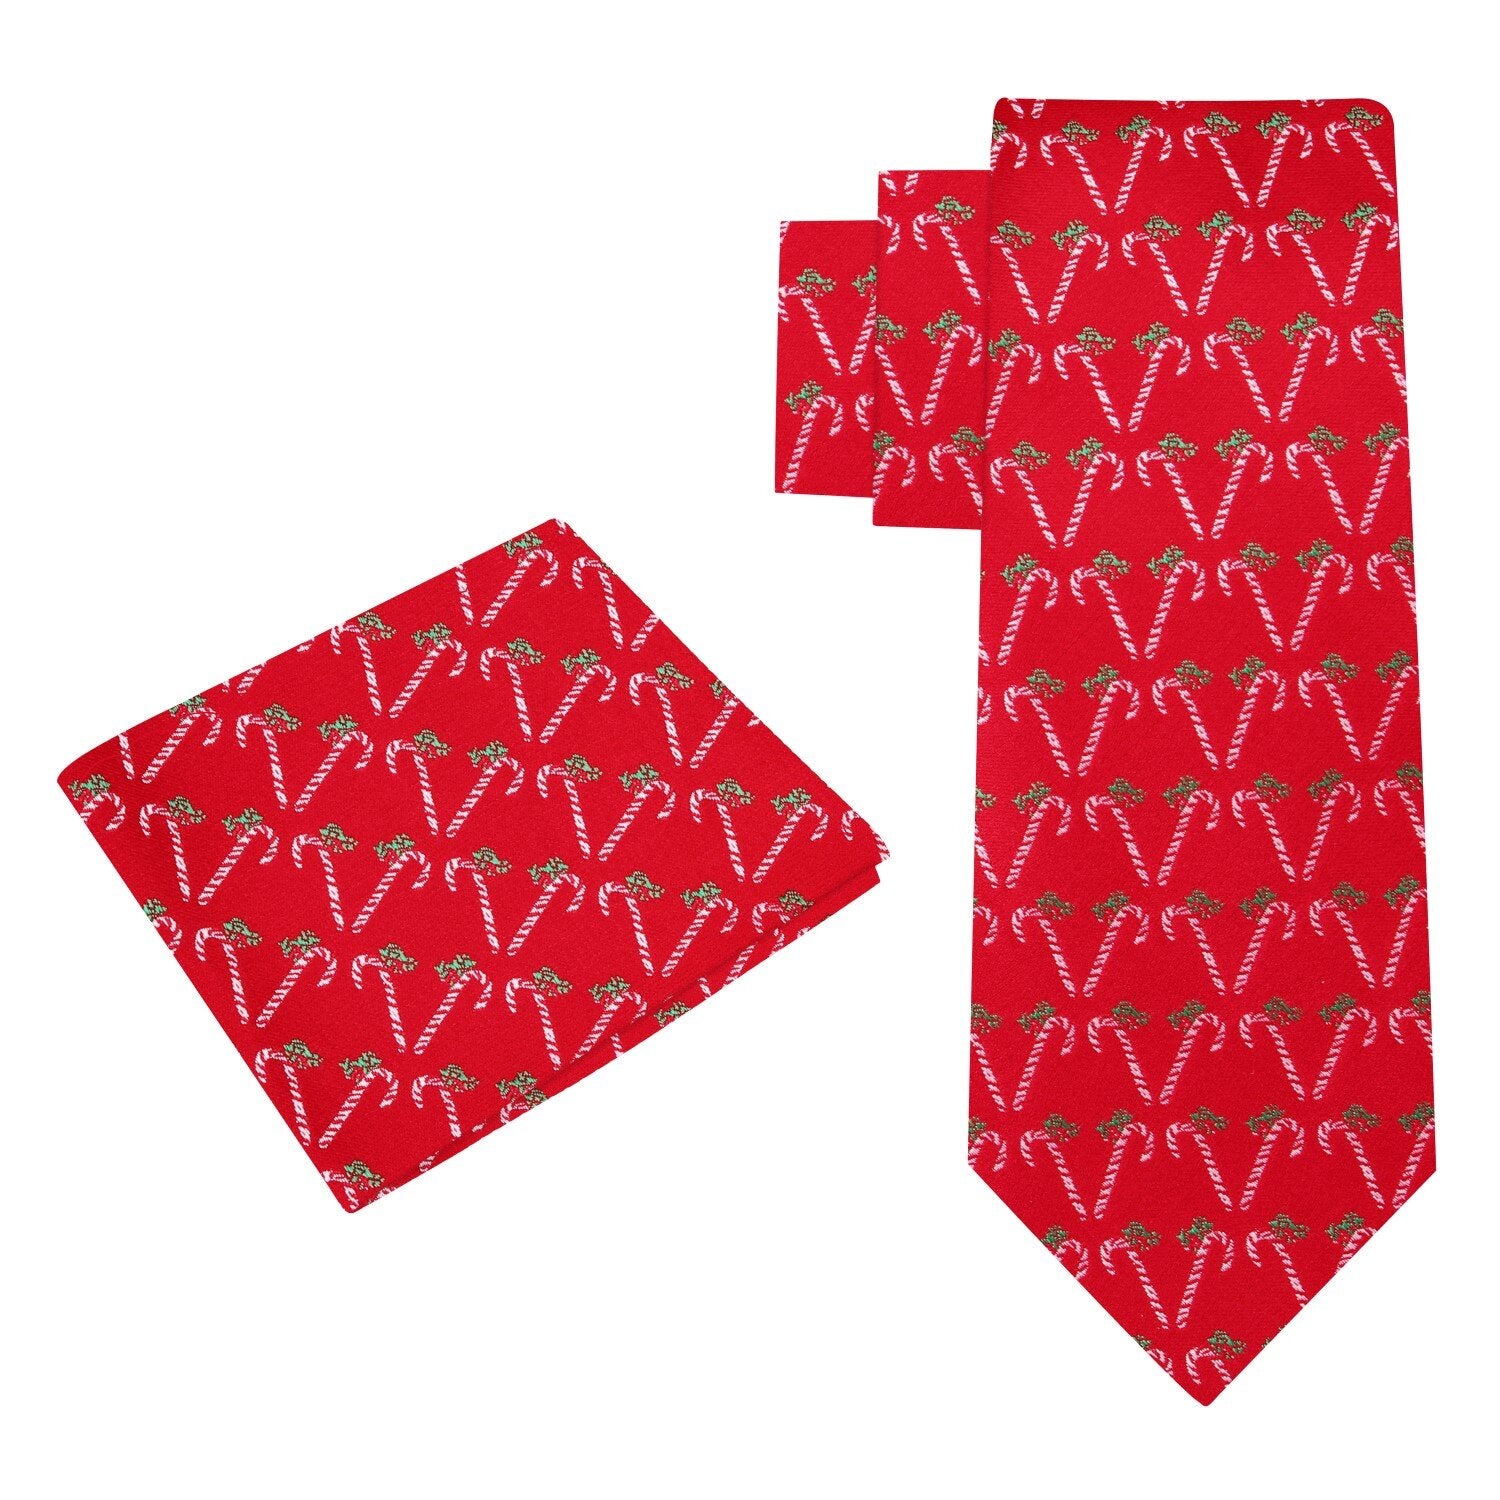 Alt View: Red, Green, White Candy Cane Silk Necktie And Pocket Square